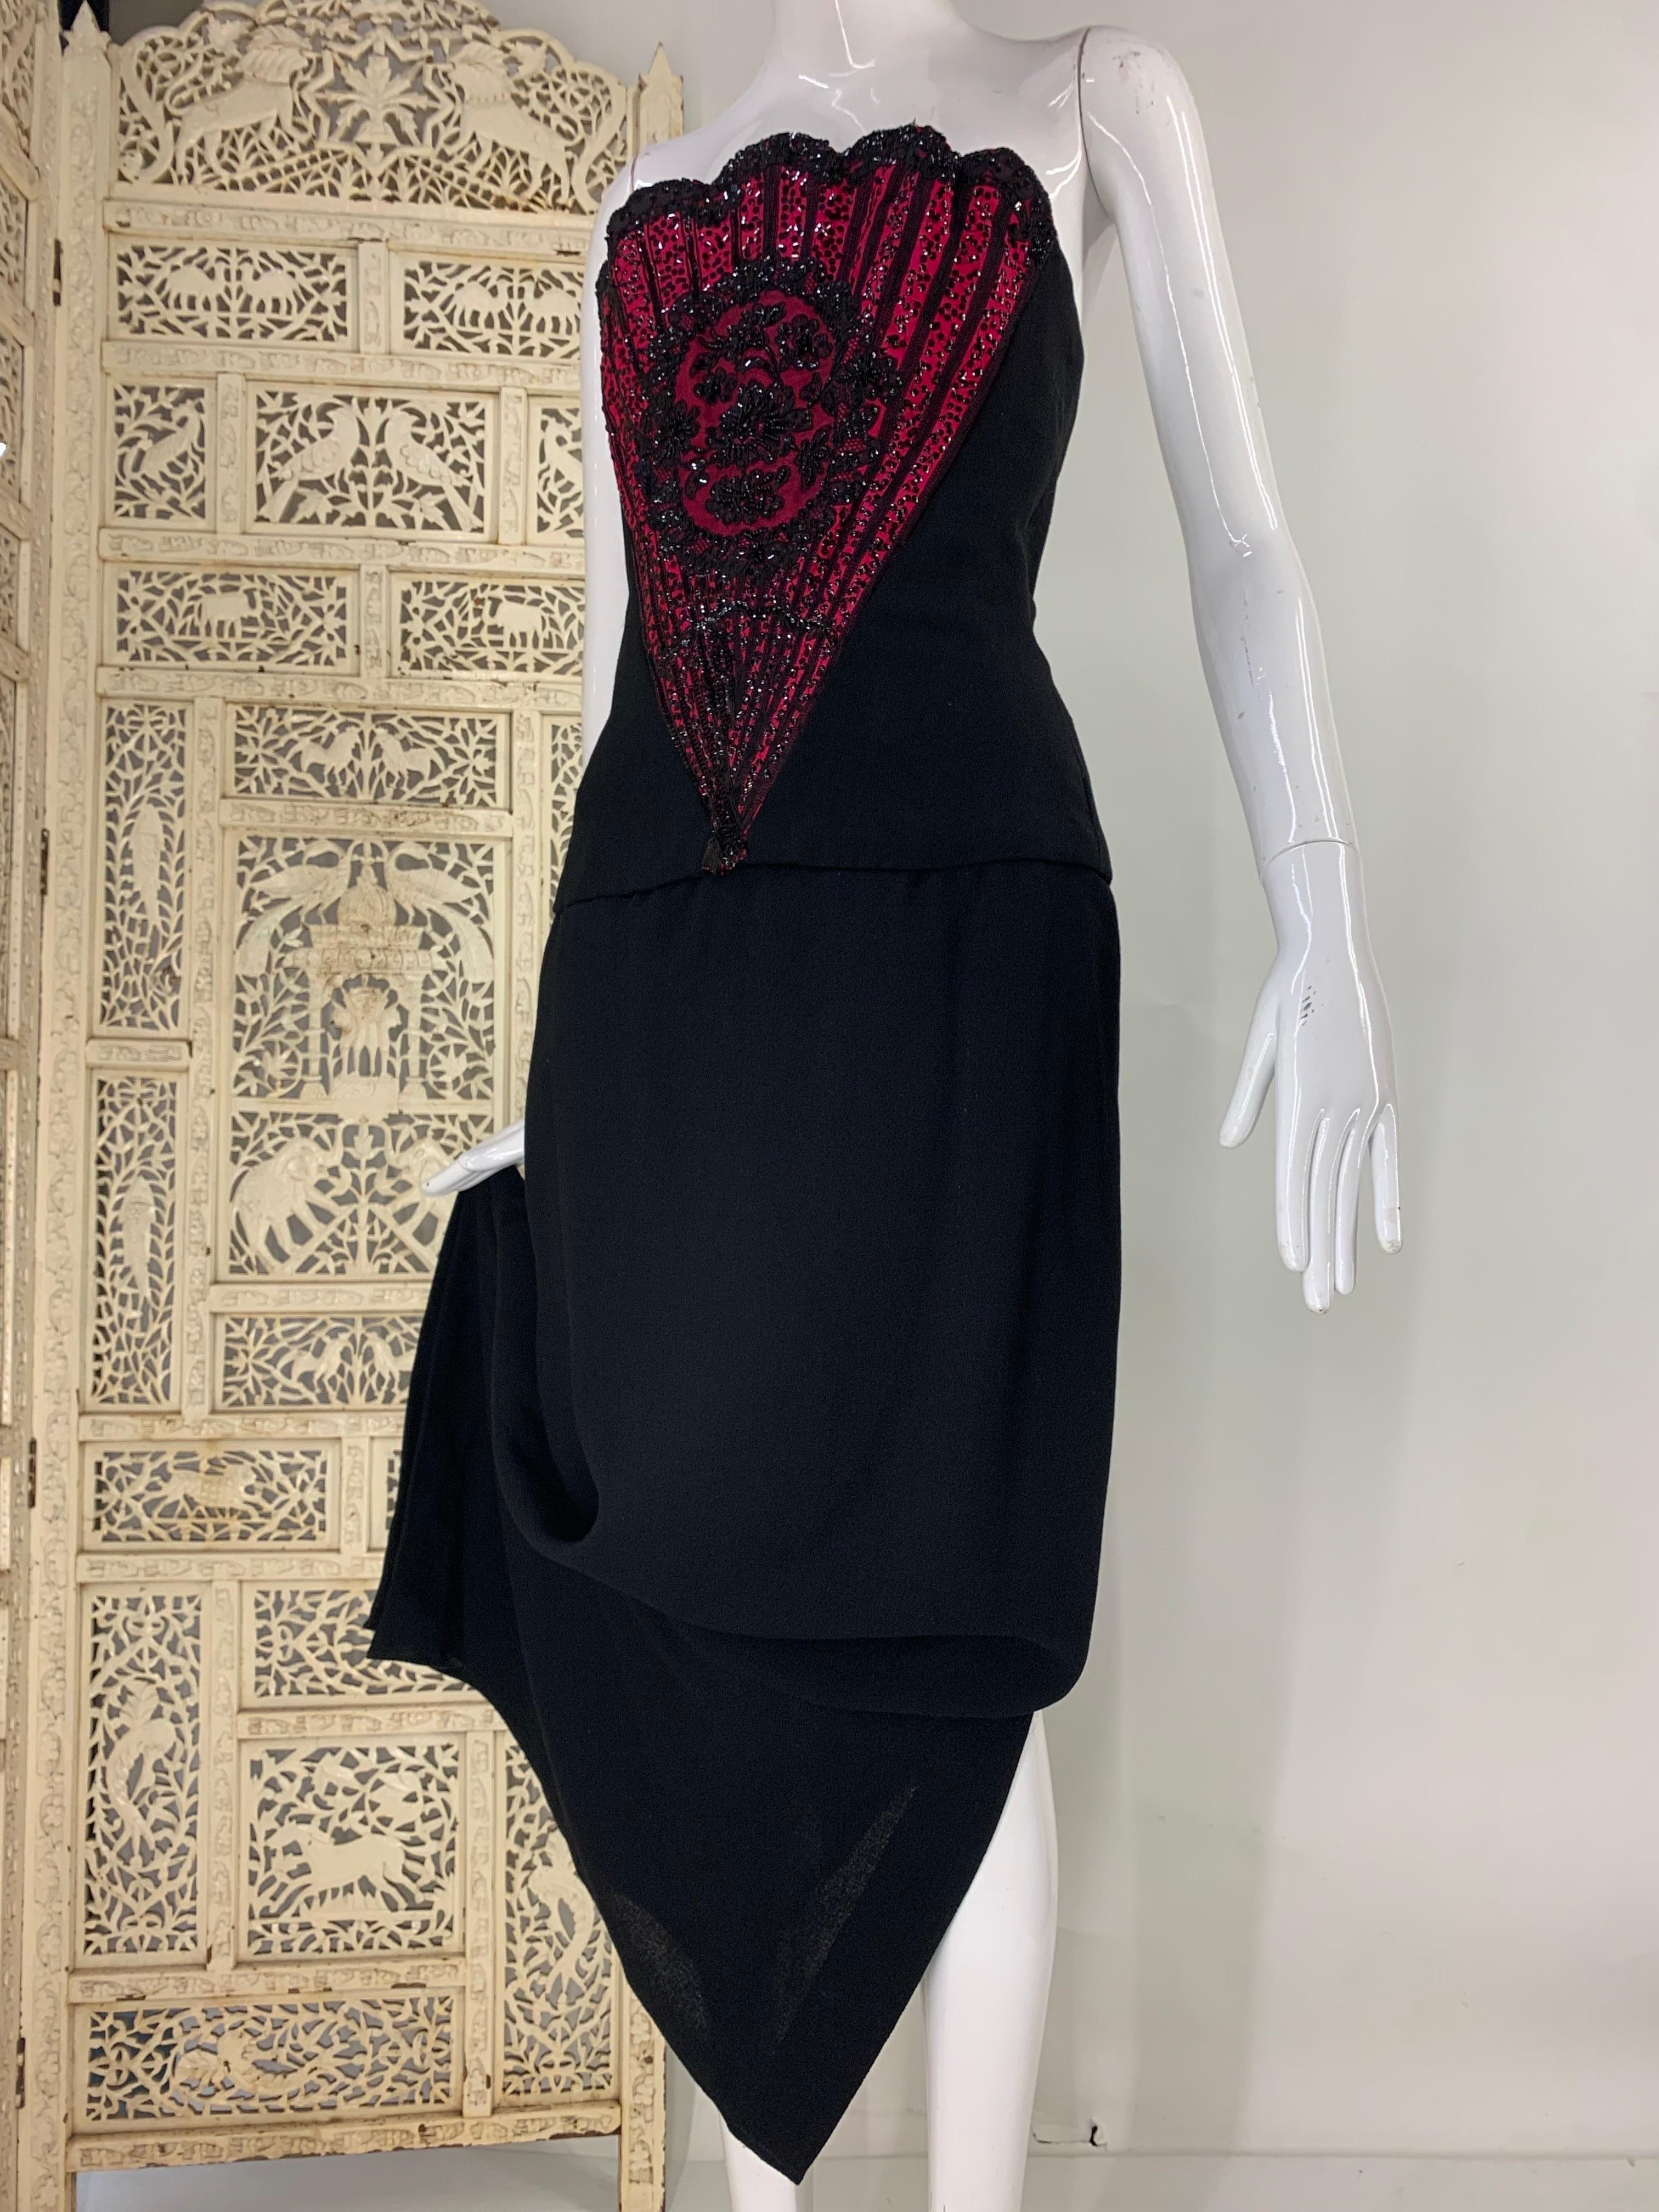 1960s George Halley Black Wool Crepe Column Gown w Stunning Beaded Fan Corset:  Remarkable Victorian inspired fuchsia and black sequin and beaded strapless fan-shaped, fully corseted and structured long-line bodice. Straight column skirt with side